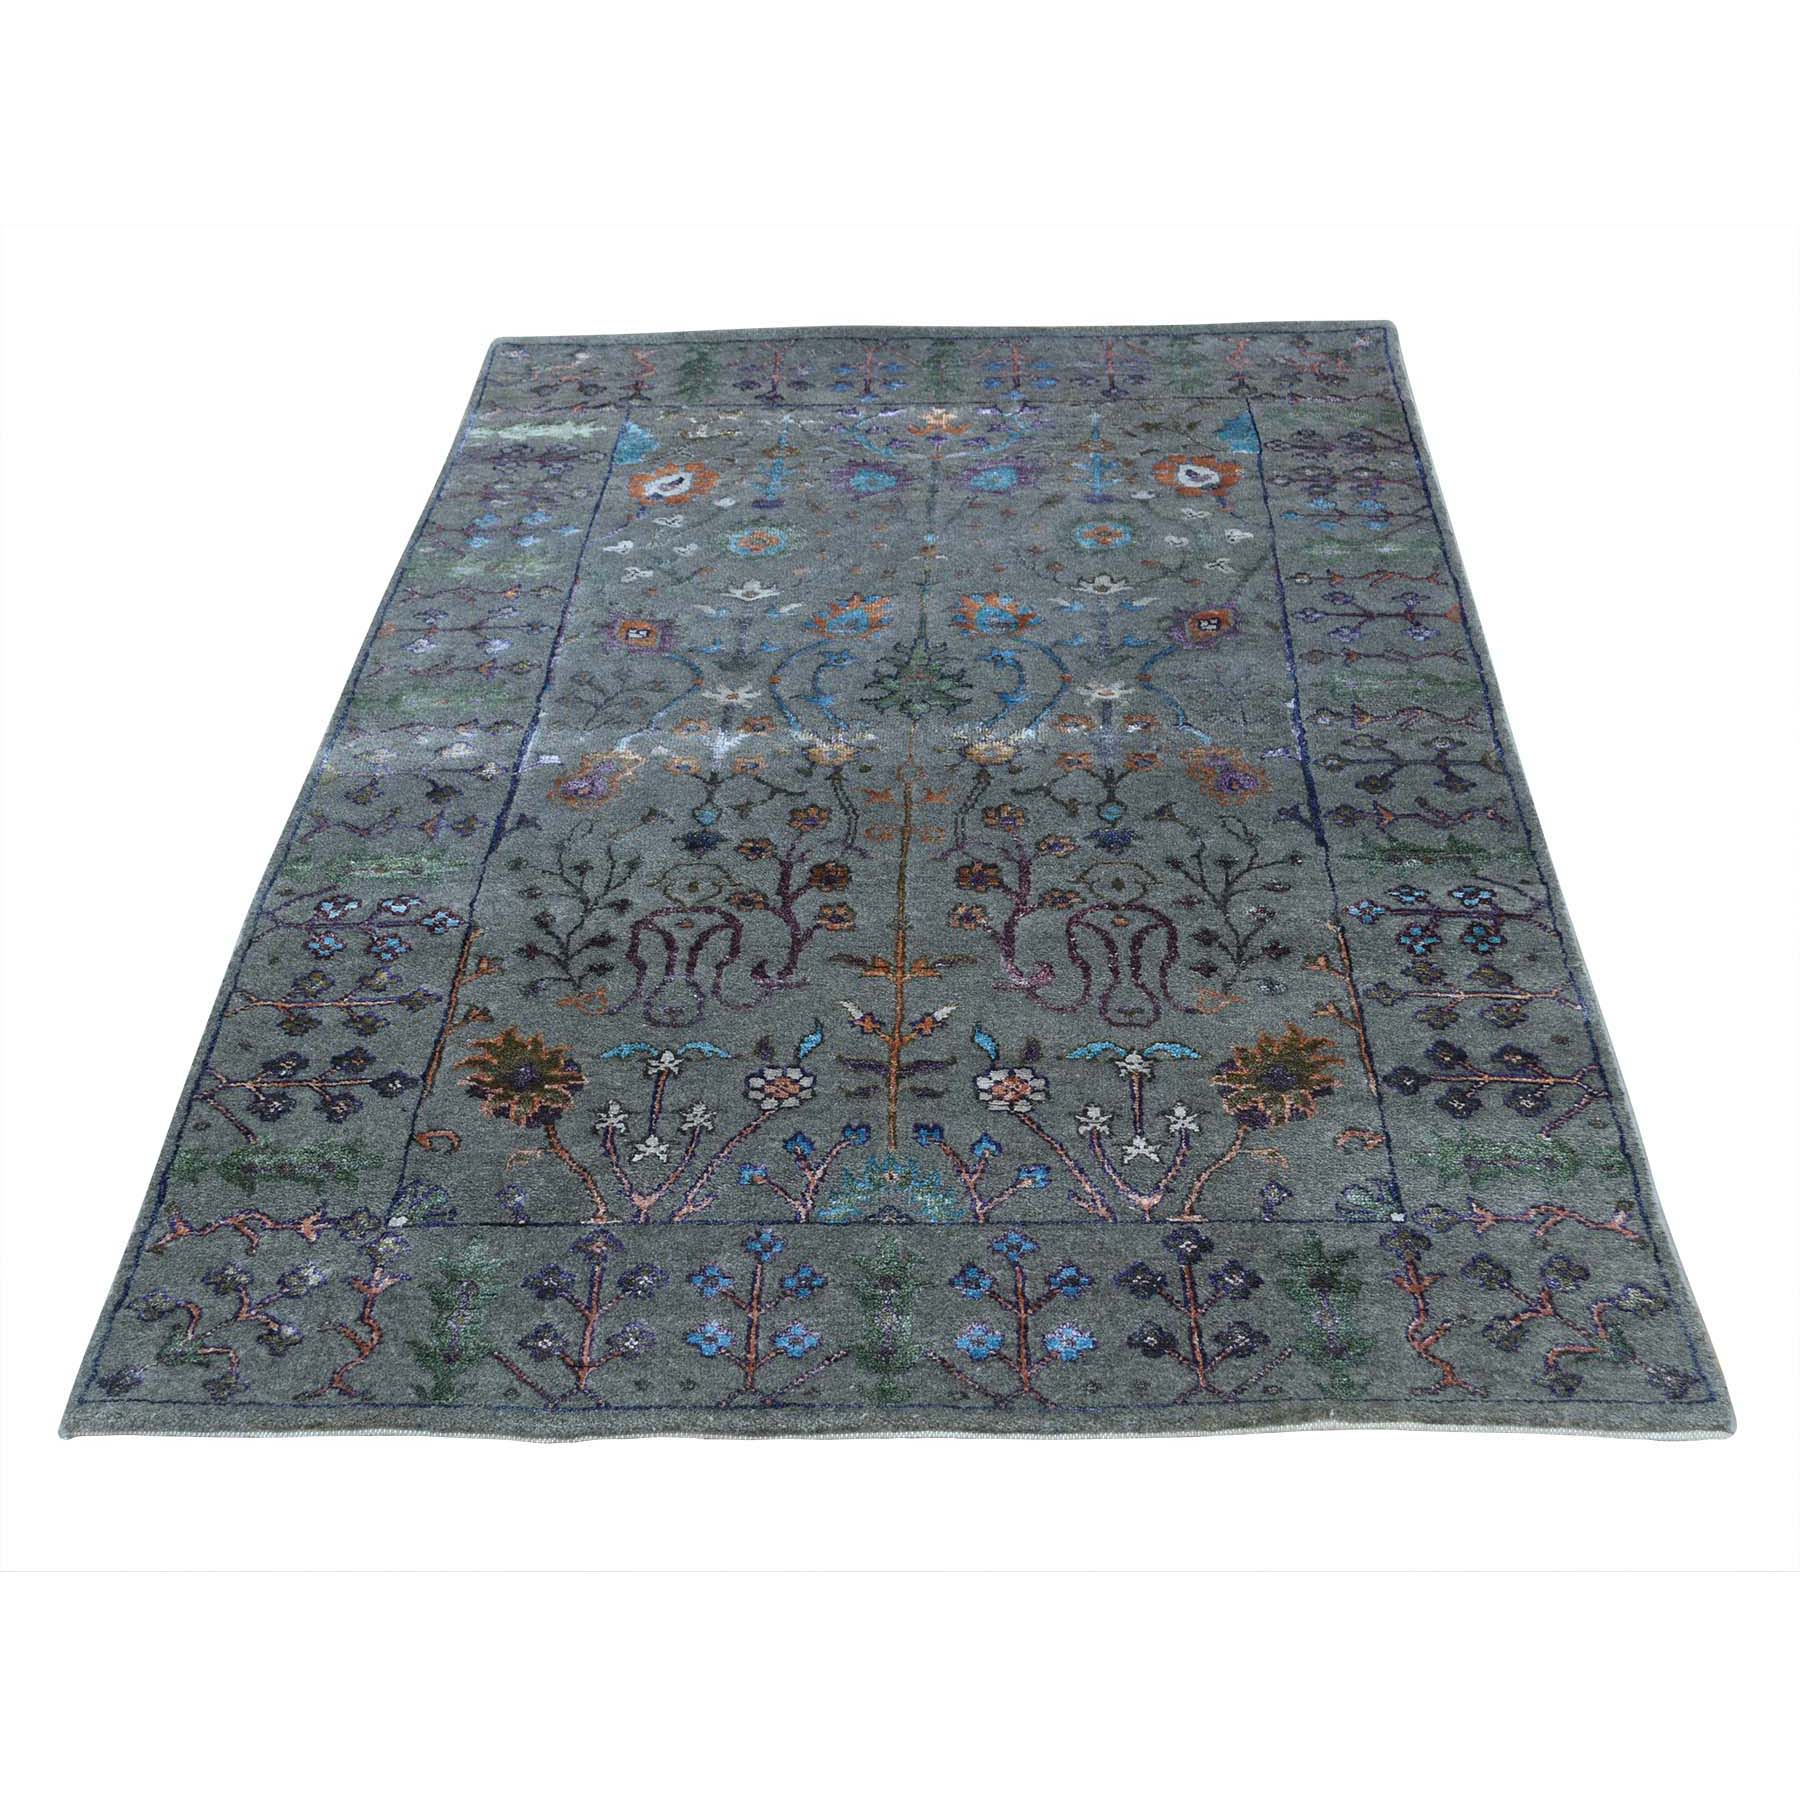 N/A Silk Hand-Knotted Area Rug 5'0